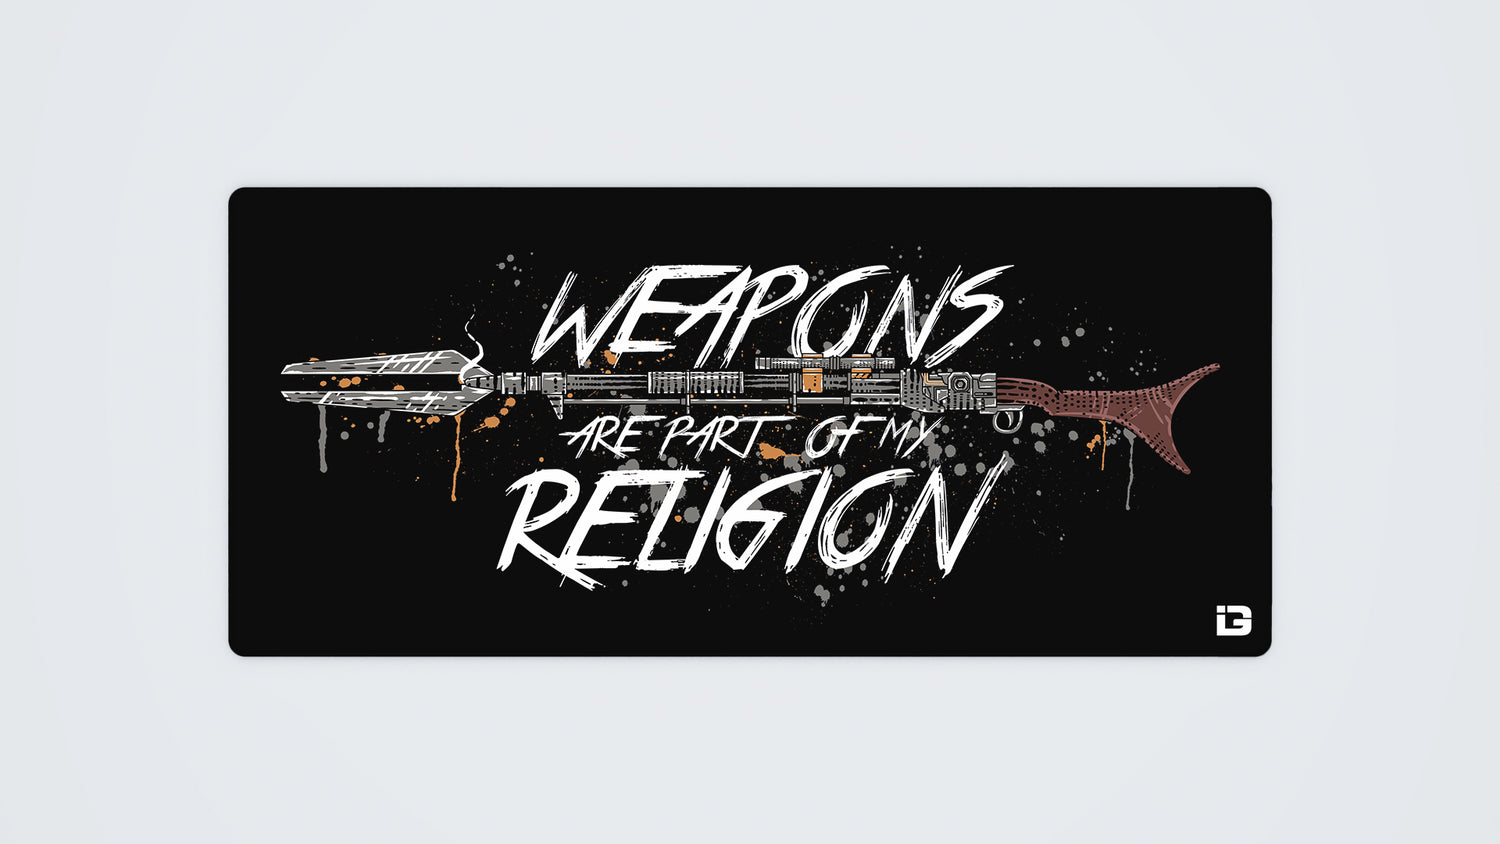 Weapons of my religion